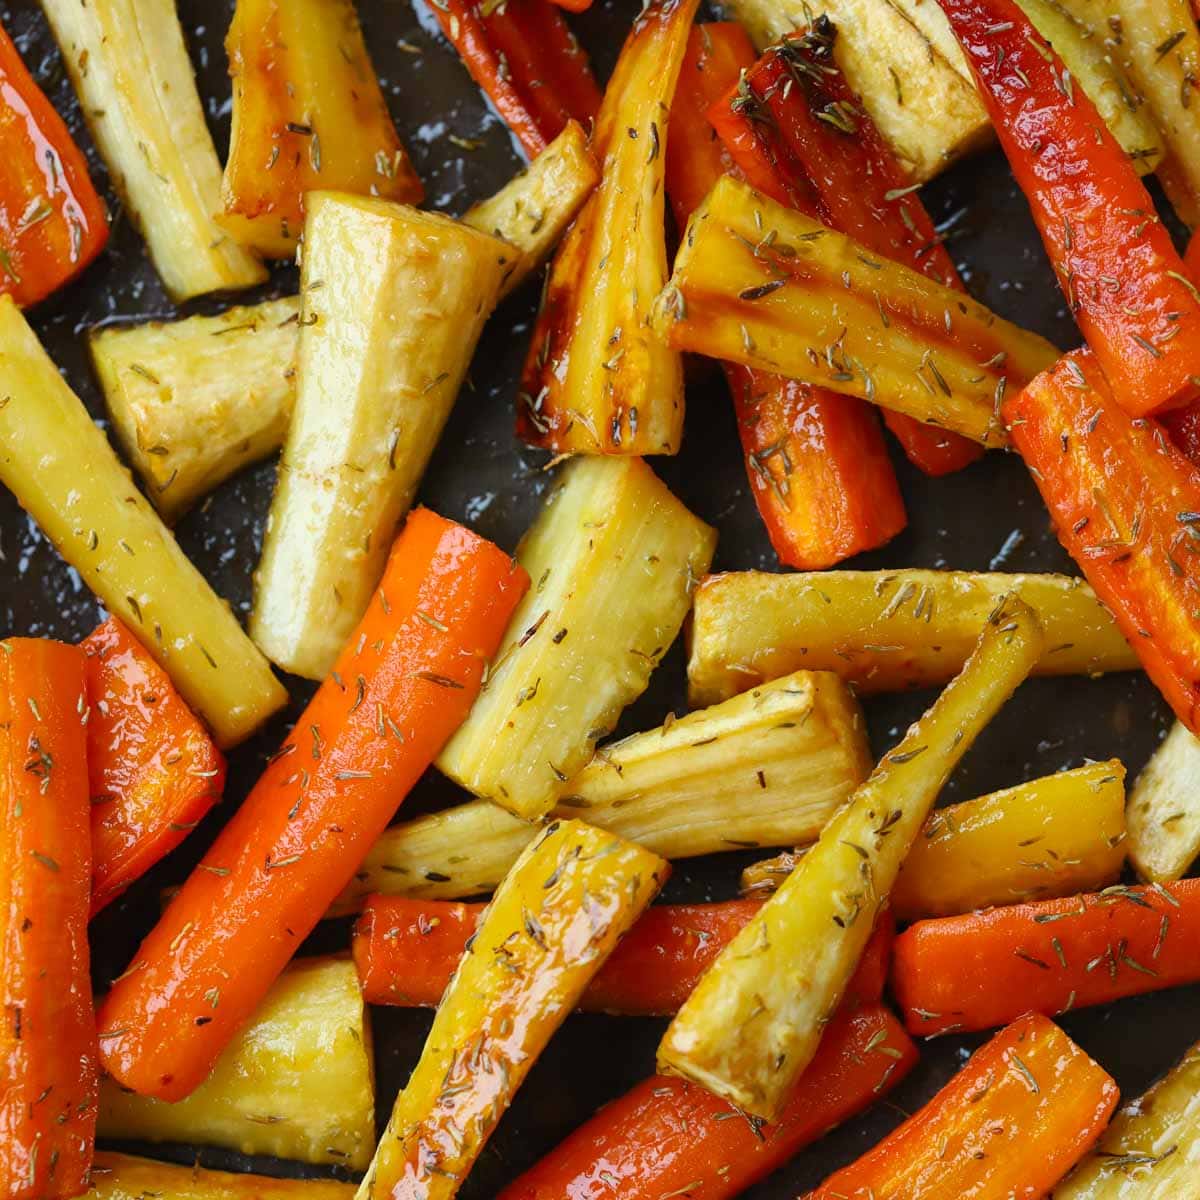 Honey Roasted Carrots and Parsnips from https://www.tamingtwins.com/